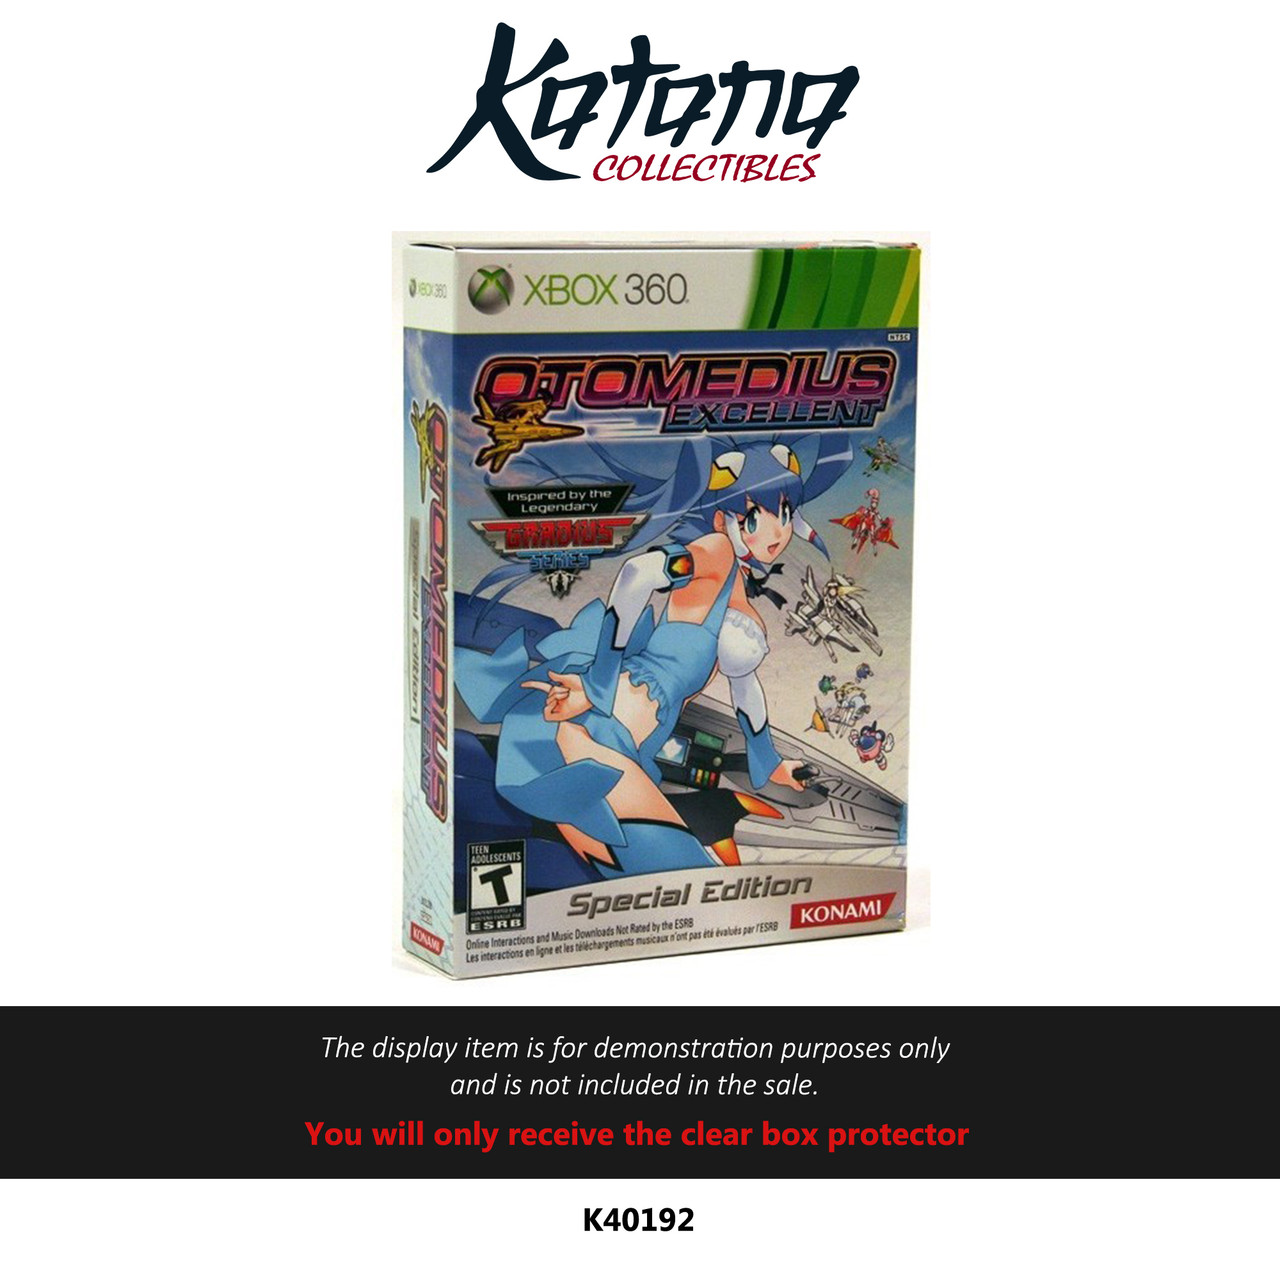 Katana Collectibles Protector For Otomedius Excellent Limited Edition Xbox 360